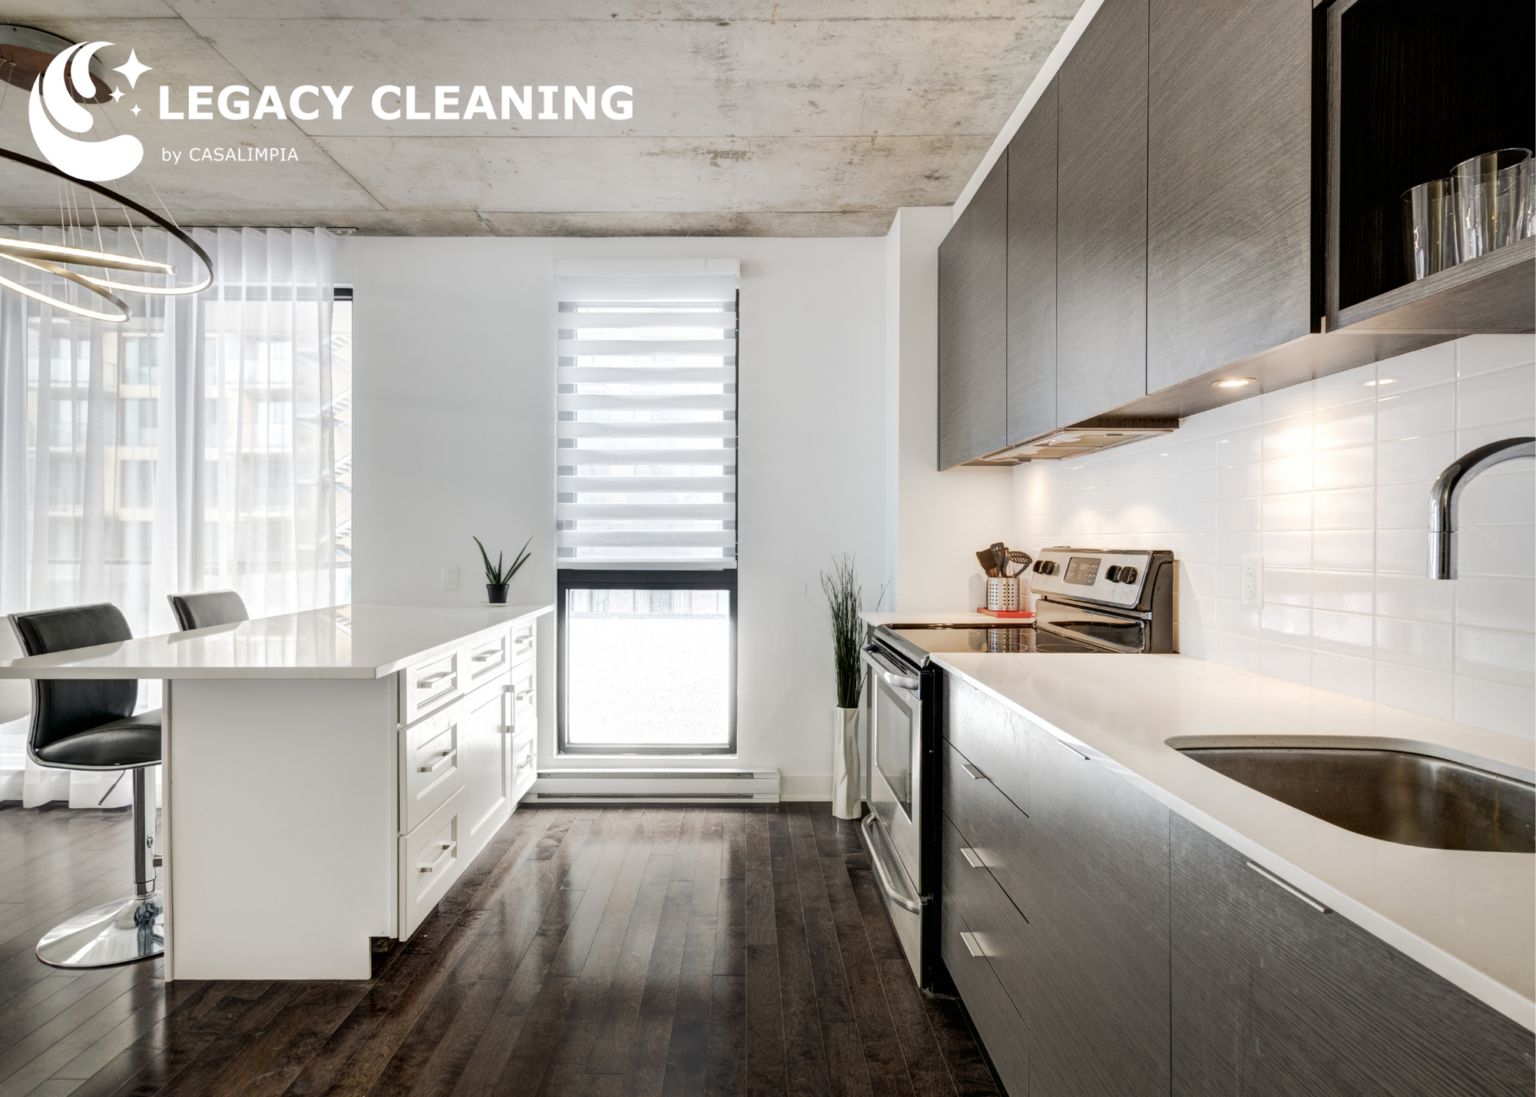 Legacy Cleaning - Vacation Rental Cleaning Service